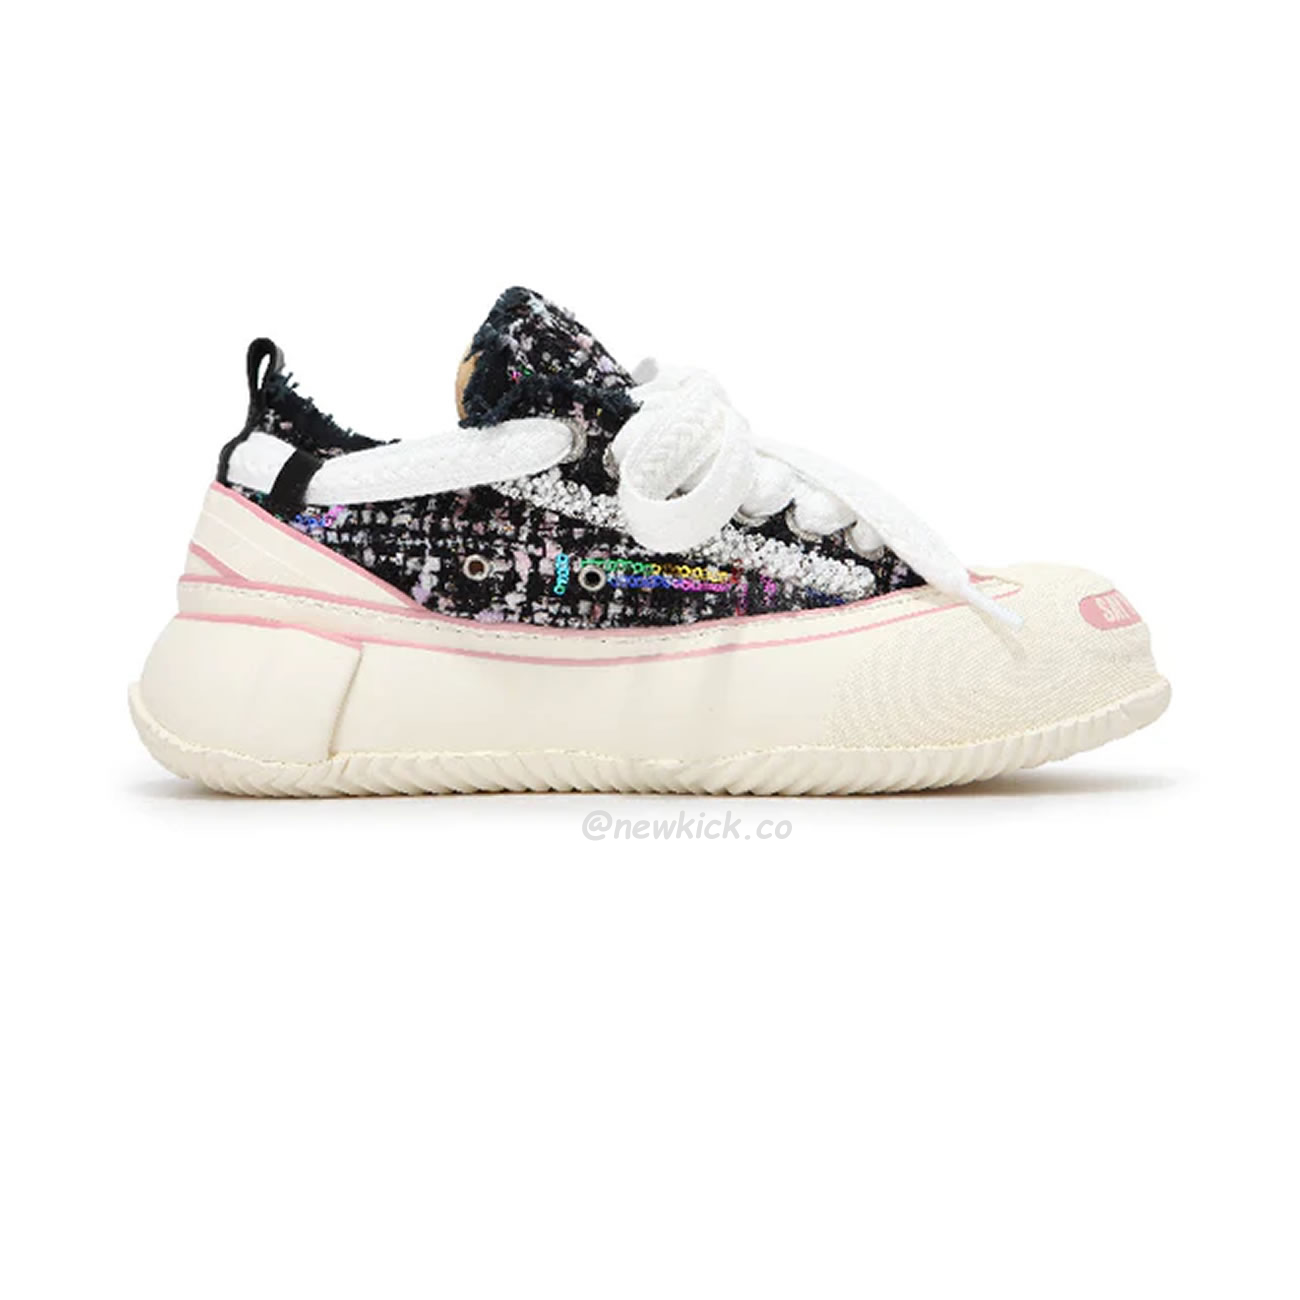 XVESSEL G.O.P. 2.0 MARSHMALLOW LOWS BLACK WHITE PINK